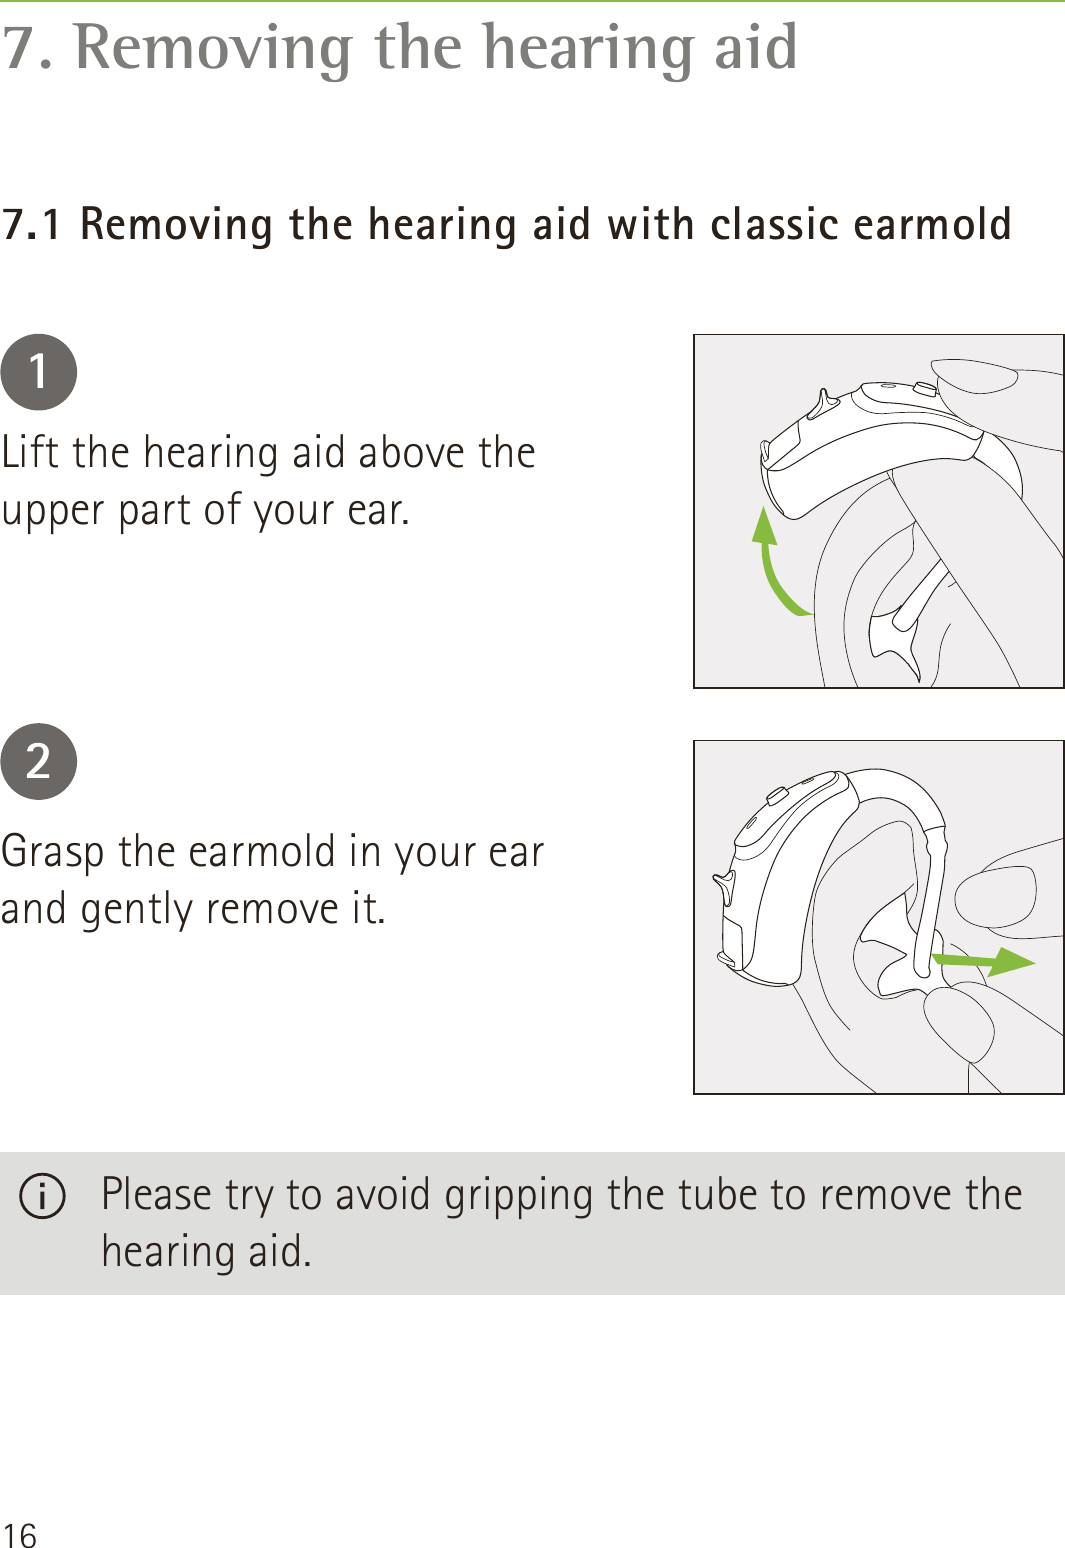 167. Removing the hearing aid7.1 Removing the hearing aid with classic earmold12Lift the hearing aid above the upper part of your ear.Grasp the earmold in your ear and gently remove it.   Please try to avoid gripping the tube to remove the hearing aid.